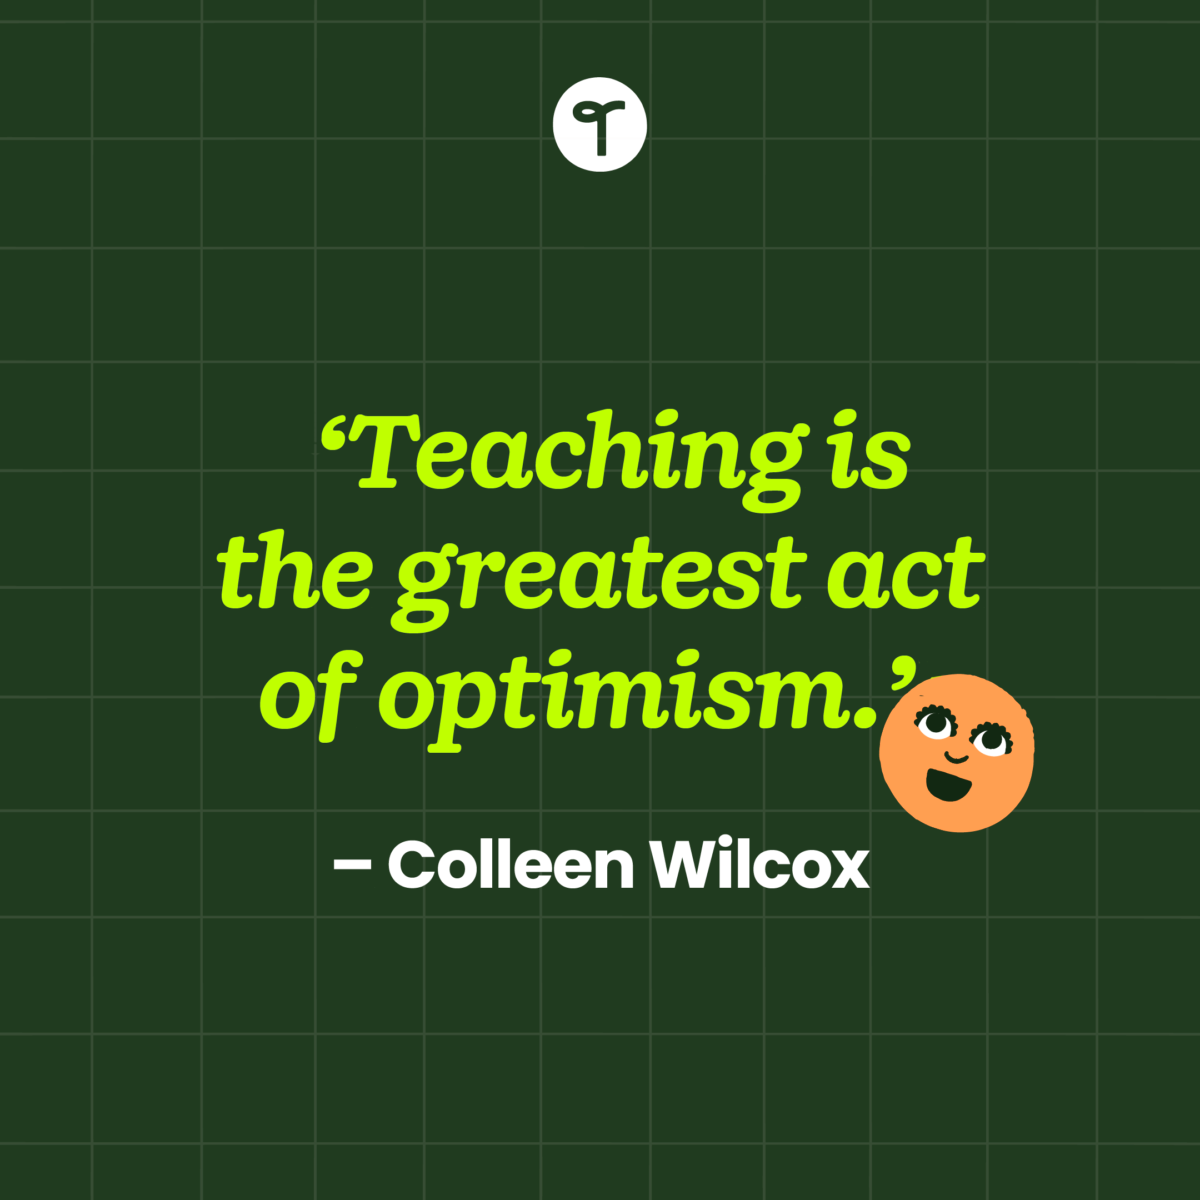 'Teaching is the greatest act of optimism.' –Colleen Wilcox written on a green background with an orange smiling face